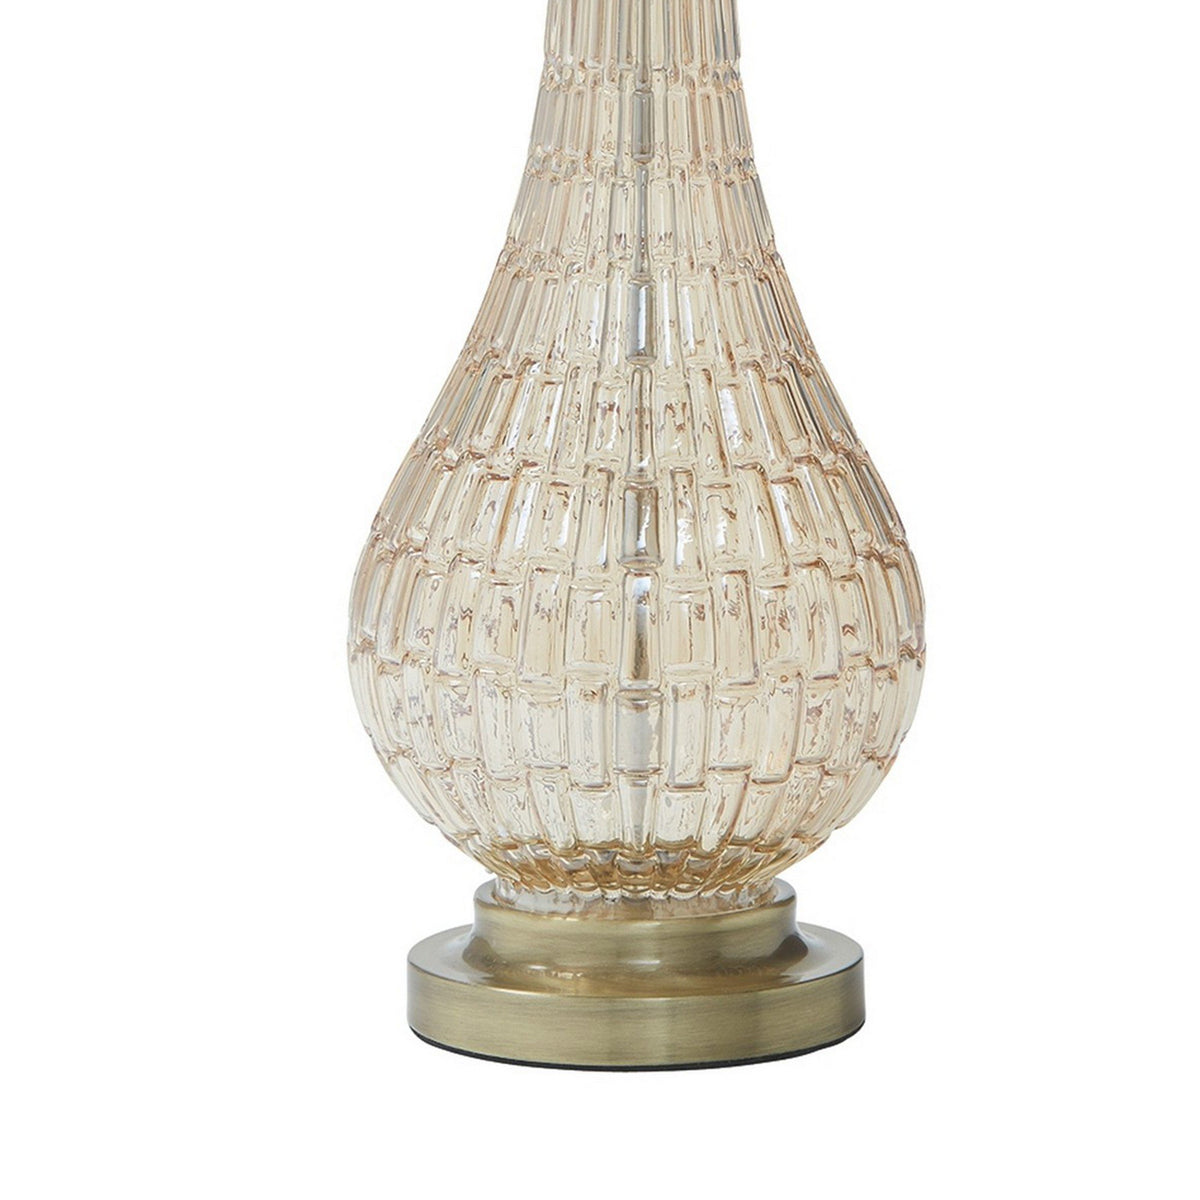 Bellied Glass Table Lamp with Fabric Drum Shade, Beige and Clear - BM230982